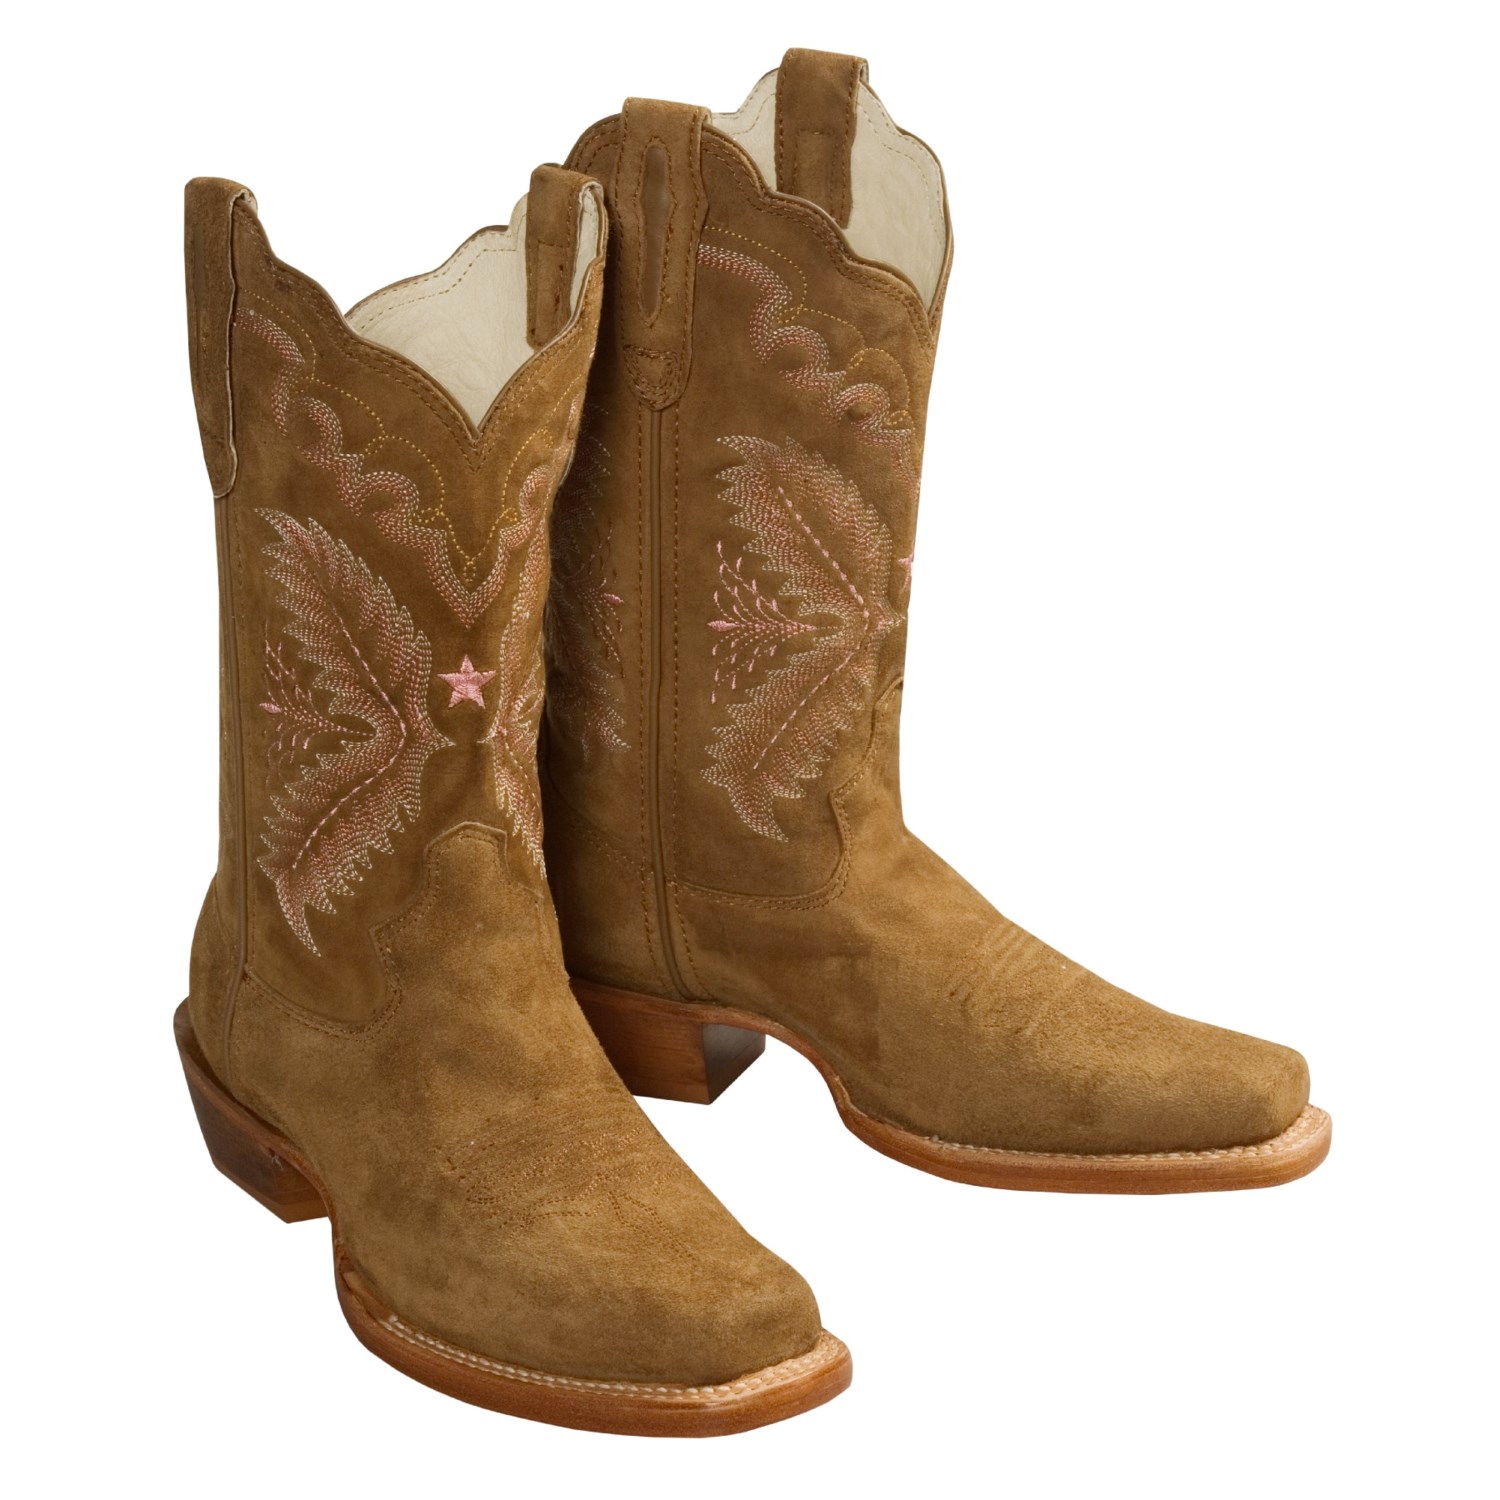 Stetson Classic Suede Western Boots with Square Toe (For Women) 83362 - Save 52%